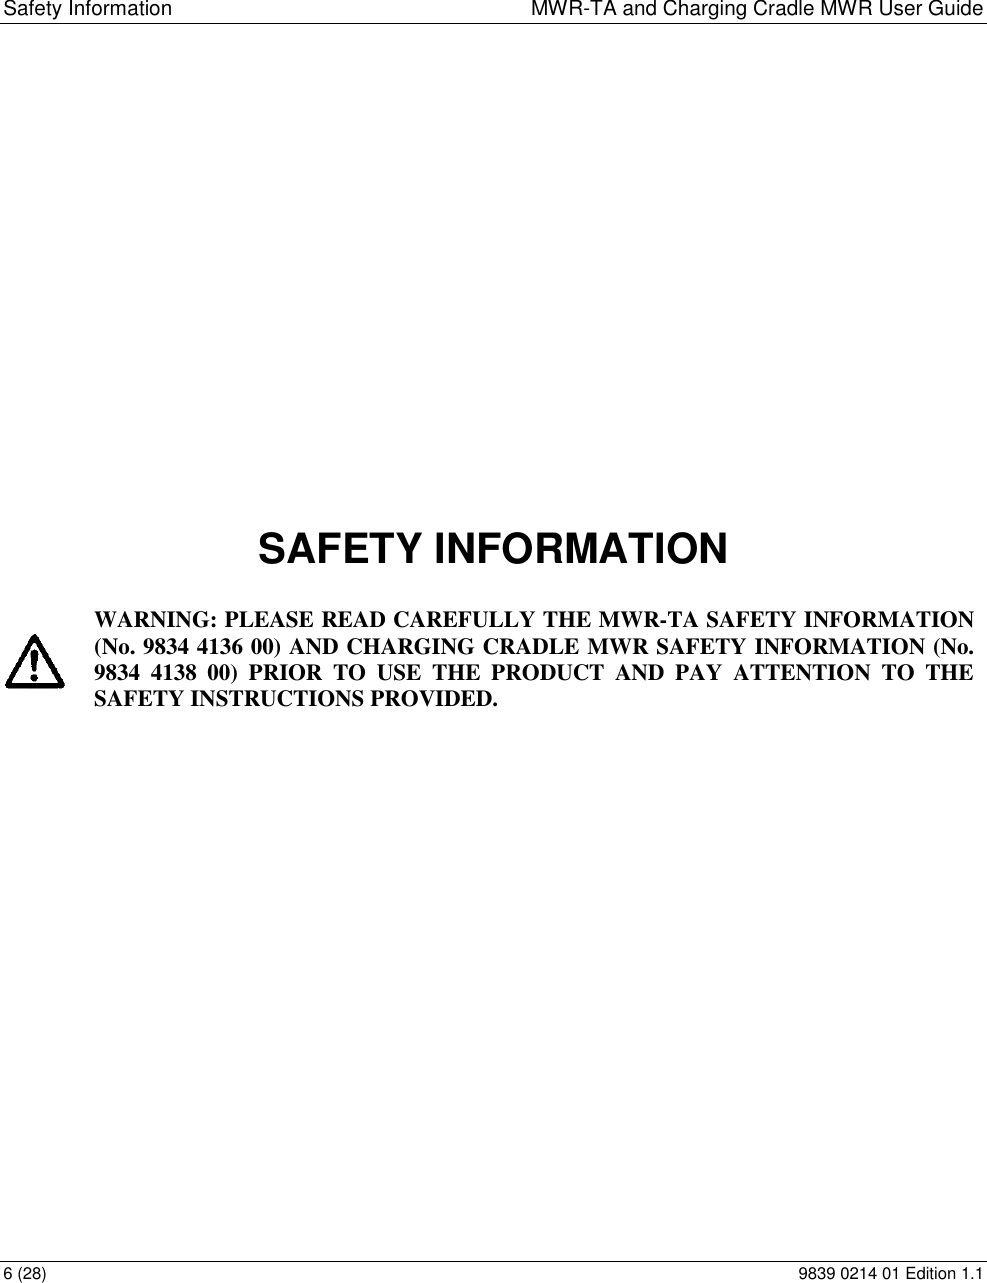 Safety Information  MWR-TA and Charging Cradle MWR User Guide 6 (28)  9839 0214 01 Edition 1.1                   SAFETY INFORMATION   WARNING: PLEASE READ CAREFULLY THE MWR-TA SAFETY INFORMATION (No. 9834 4136 00) AND CHARGING CRADLE MWR SAFETY INFORMATION (No. 9834  4138  00)  PRIOR  TO  USE  THE  PRODUCT  AND  PAY  ATTENTION  TO  THE SAFETY INSTRUCTIONS PROVIDED.       